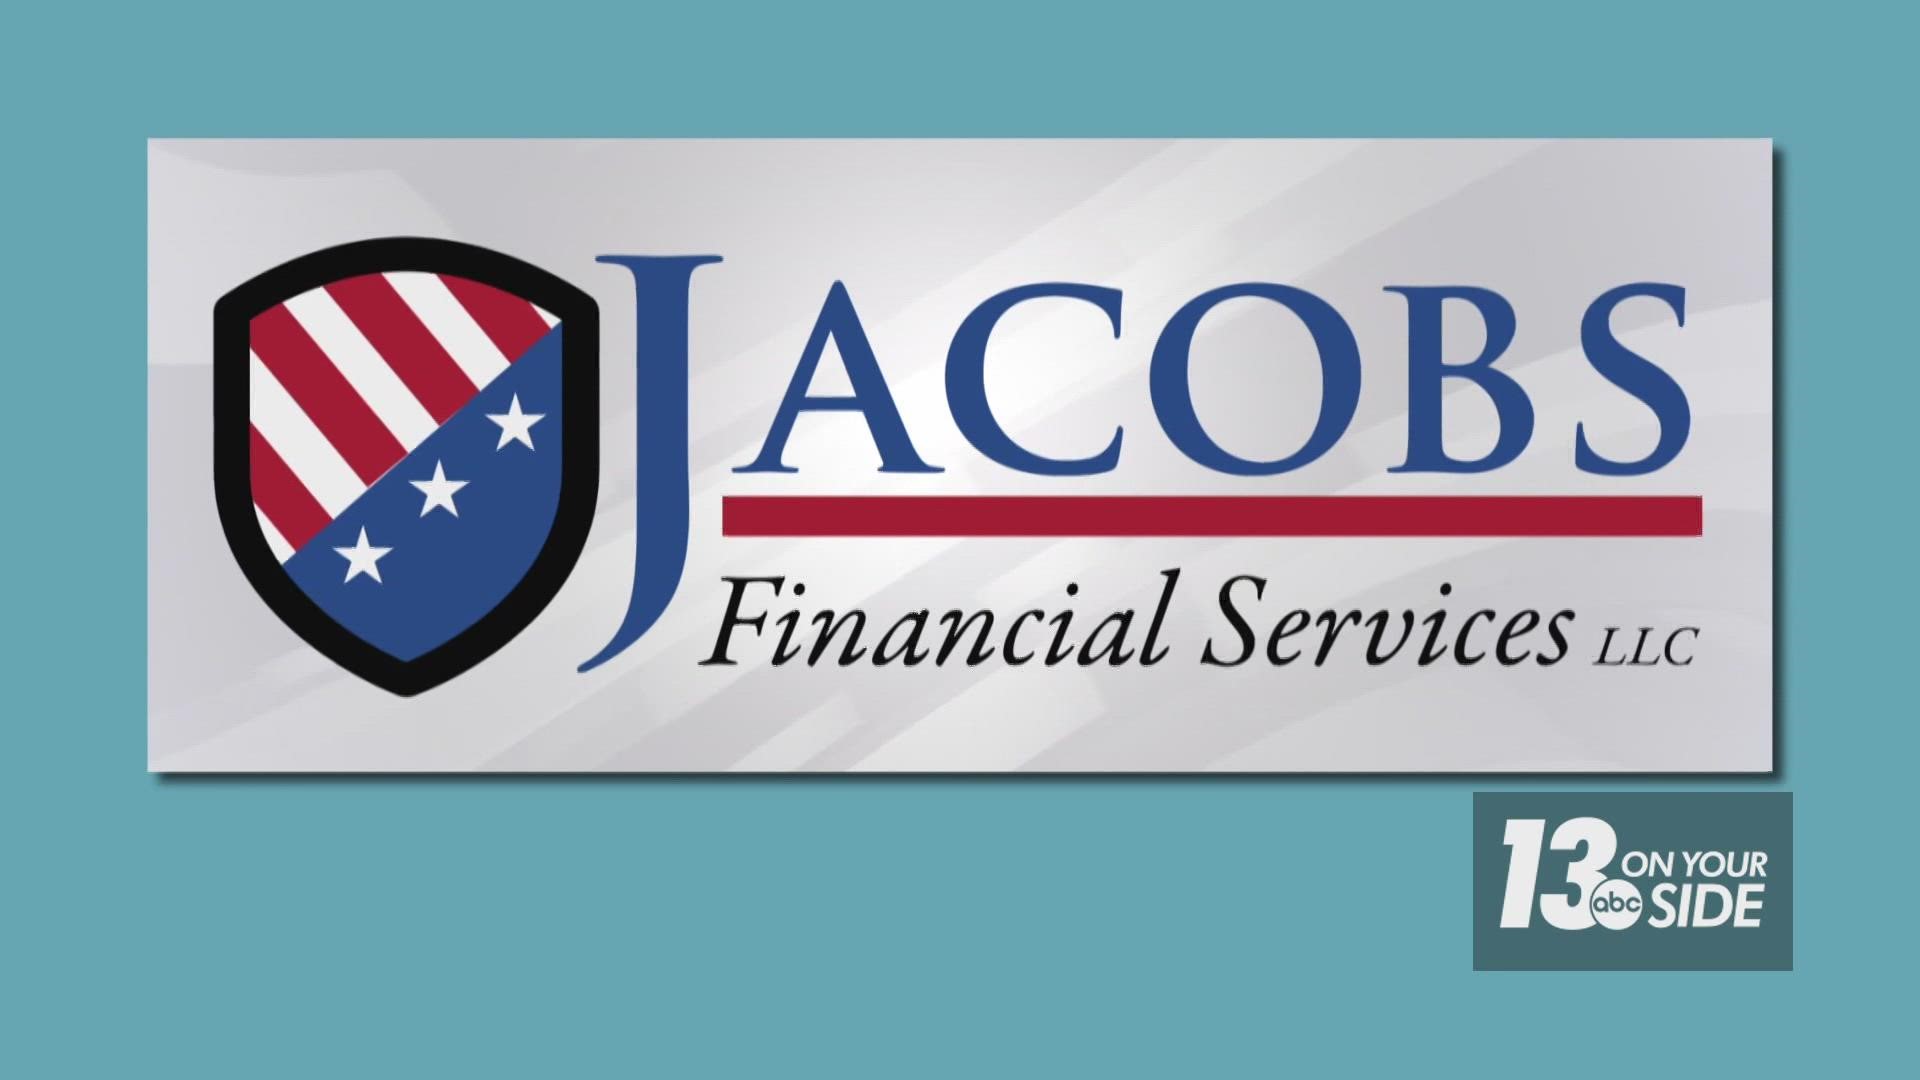 Tom Jacobs from Jacobs Financial Services explained how he can help create a strategy for your retirement years.